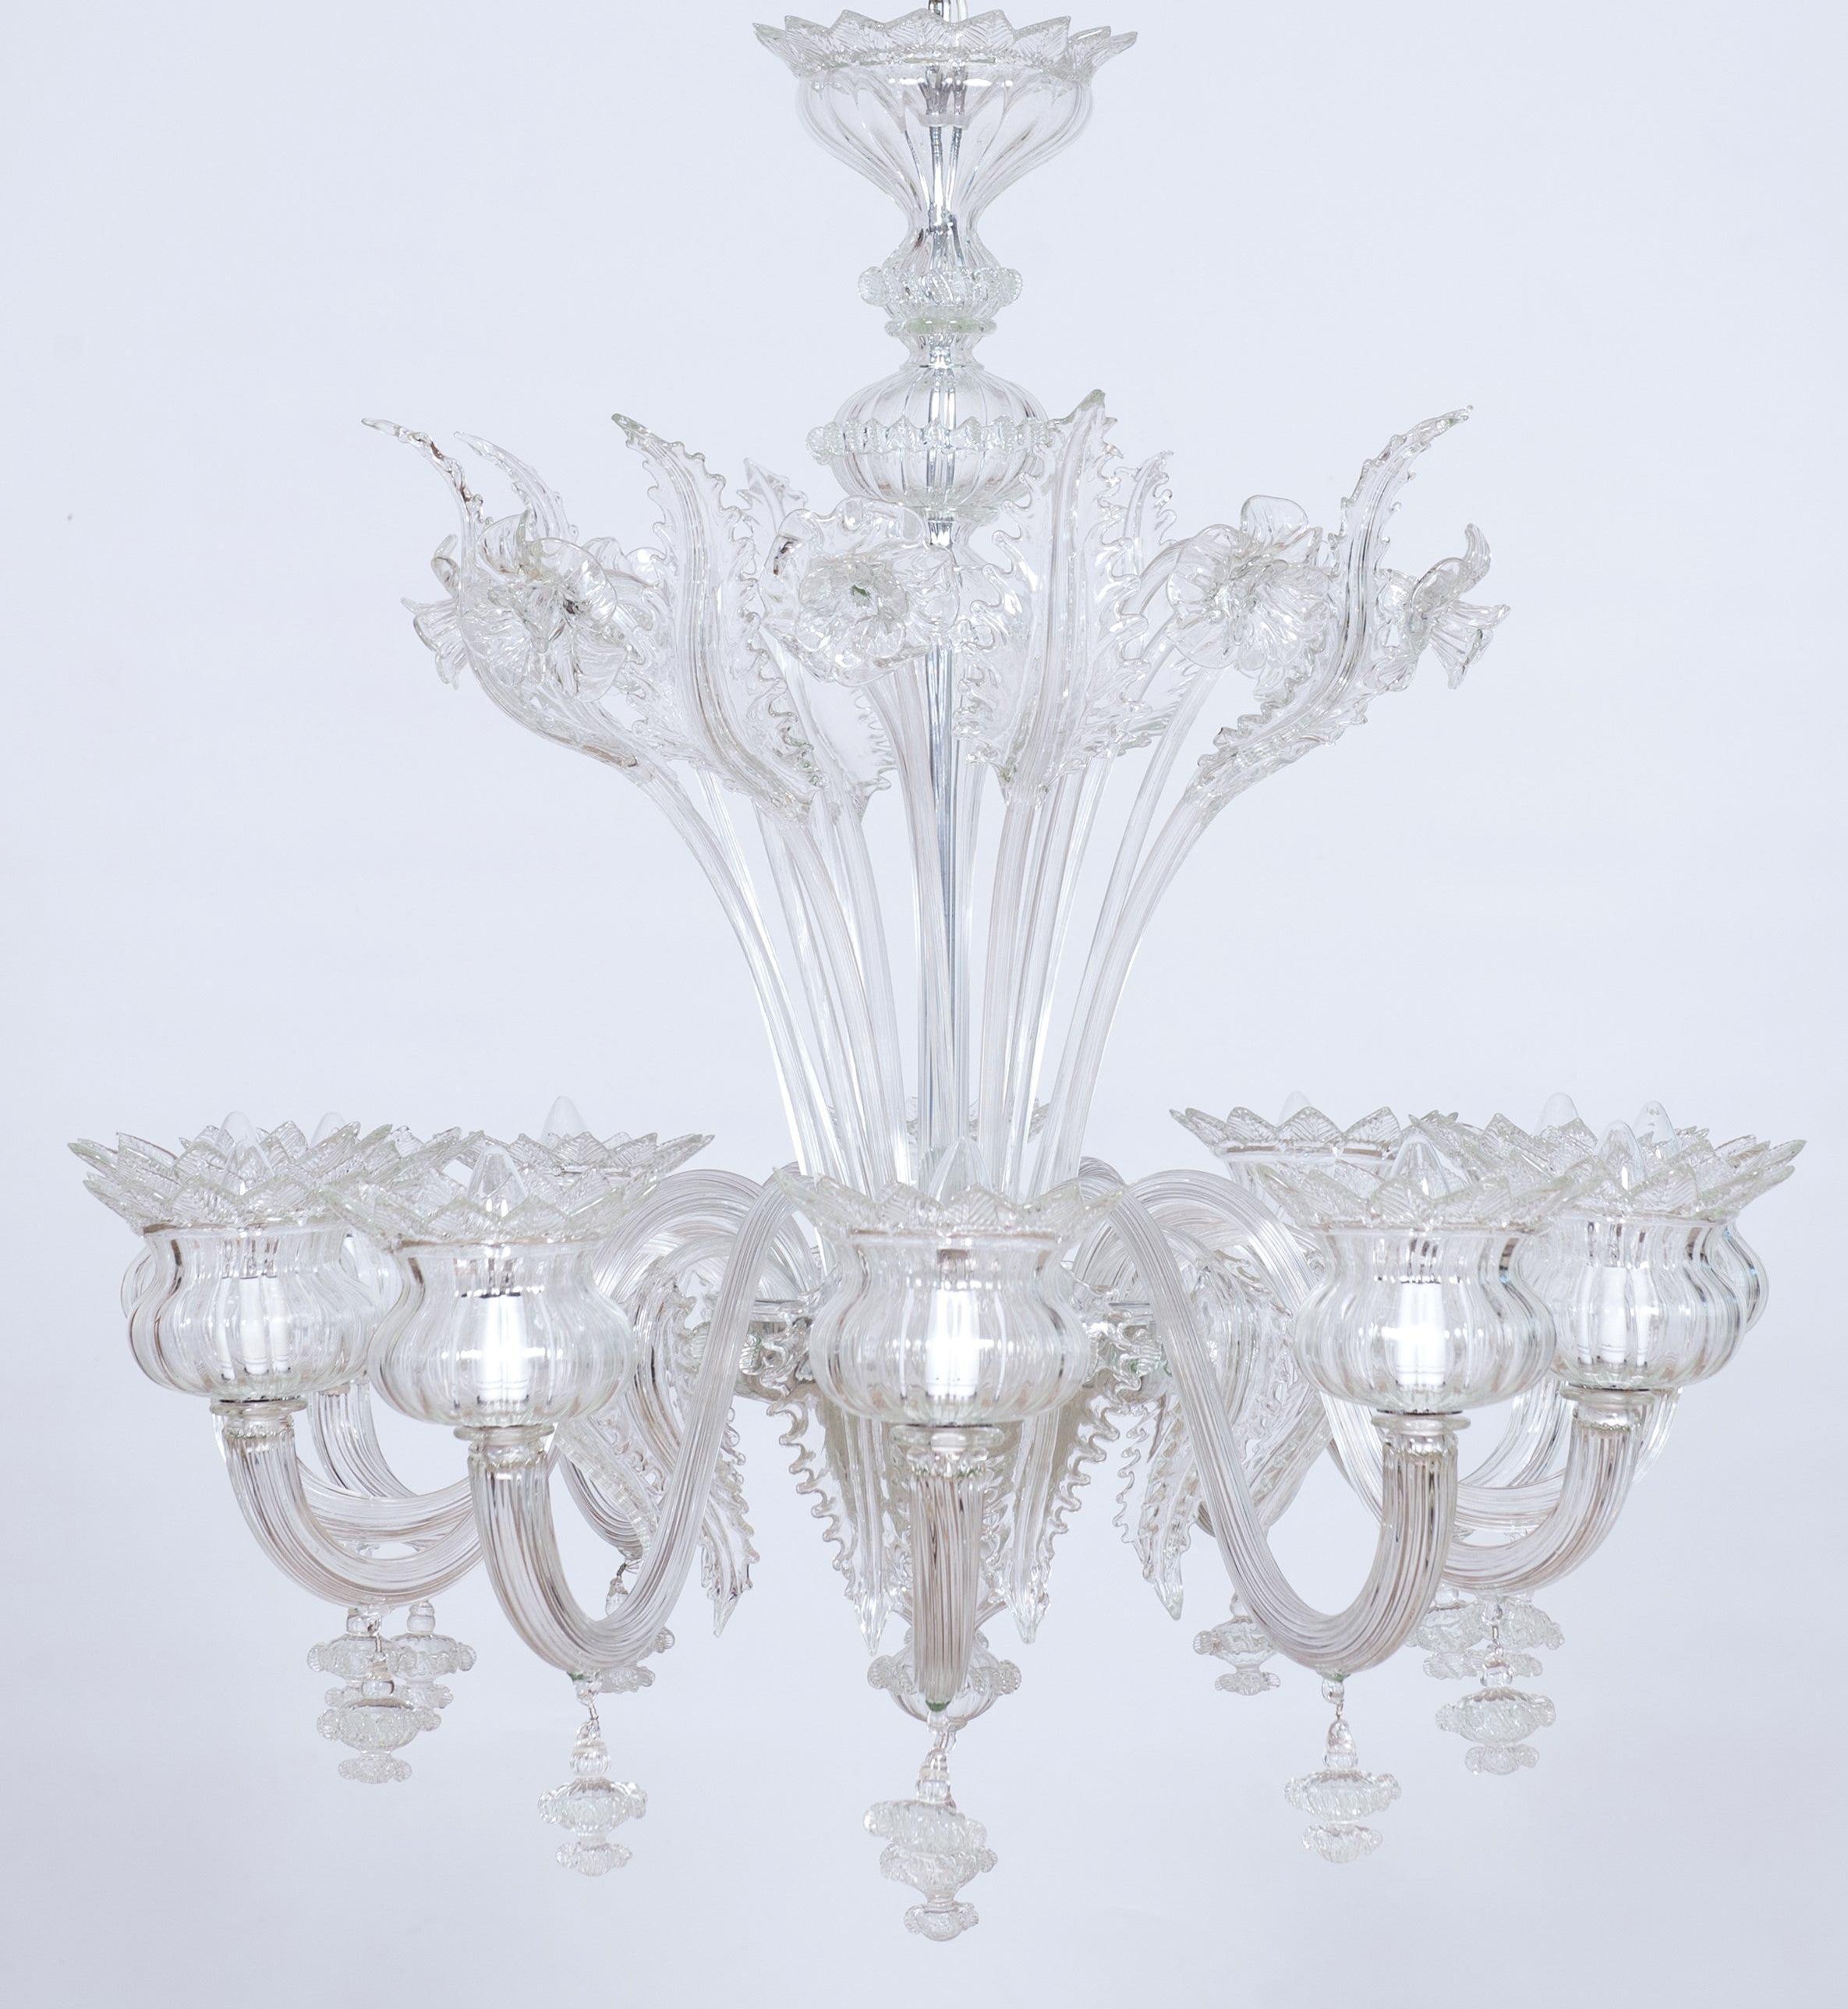 Transparent clear color daisy chandelier in Murano glass with 12 lights, 21st century, Italy.
The richness and perfection of the floral details that embellish this chandelier is the product of the best Murano glassblowing tradition. Twelve